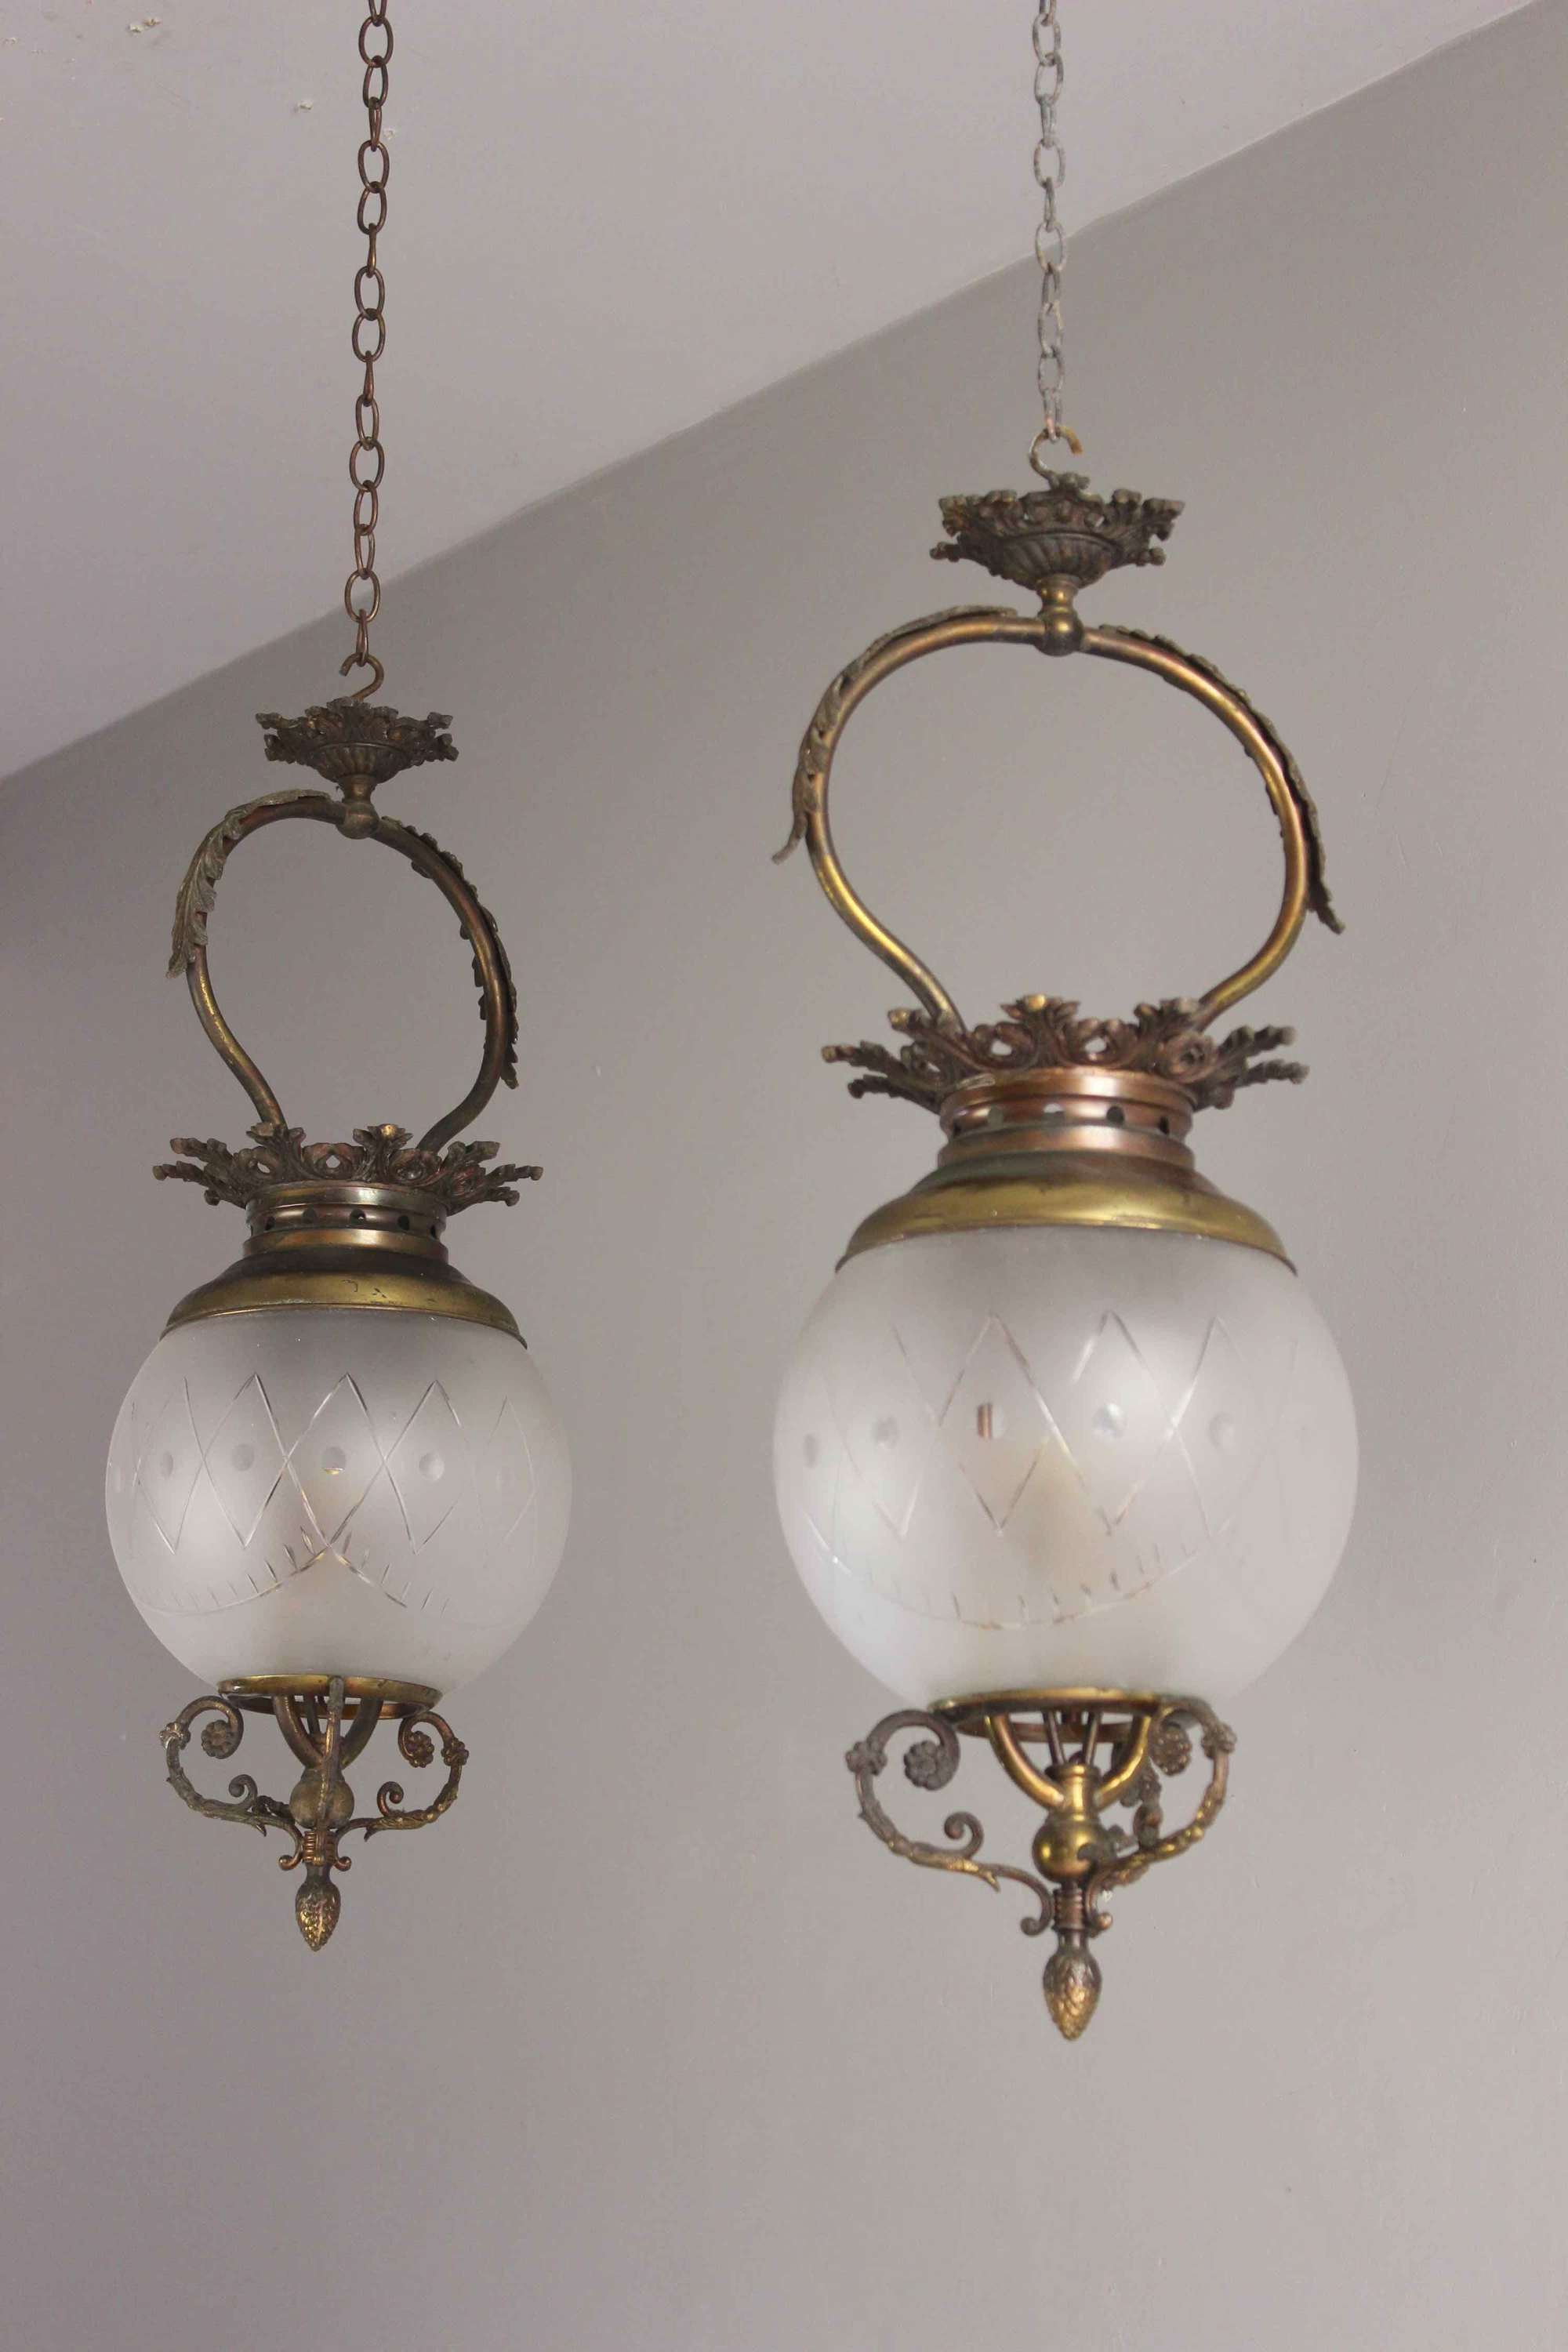 Pair of Italian etched glass traditional globe lanterns